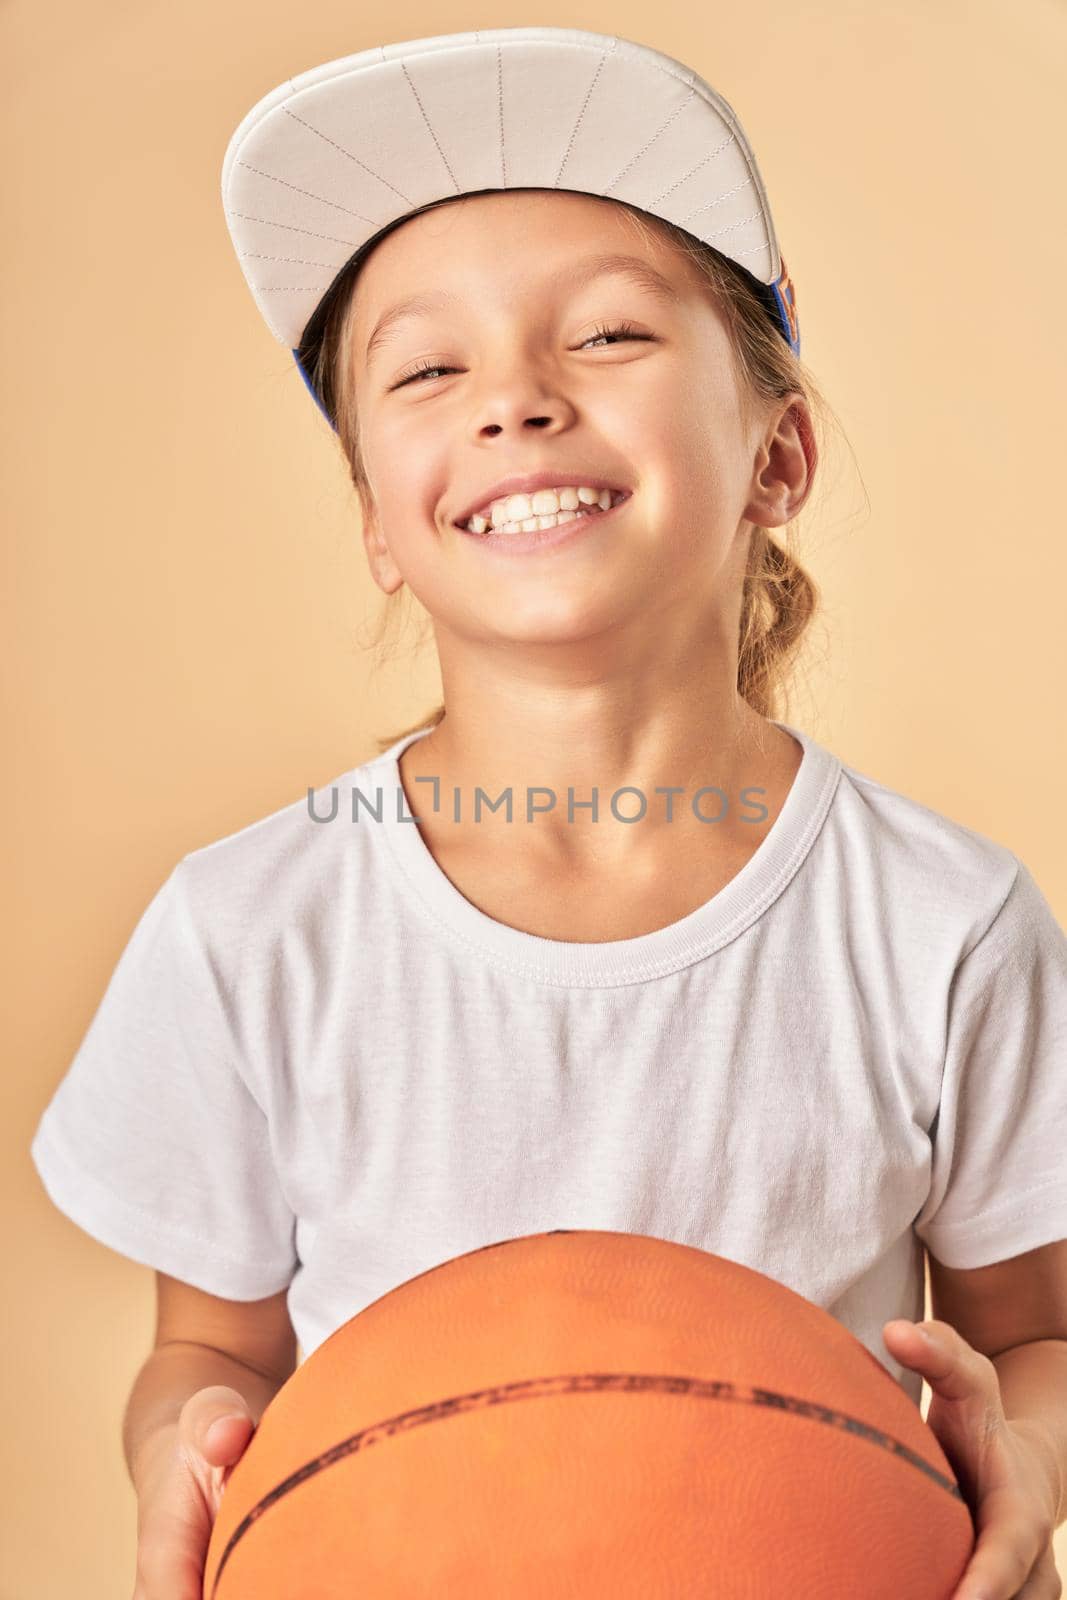 Cheerful female child in cap holding basketball ball by friendsstock